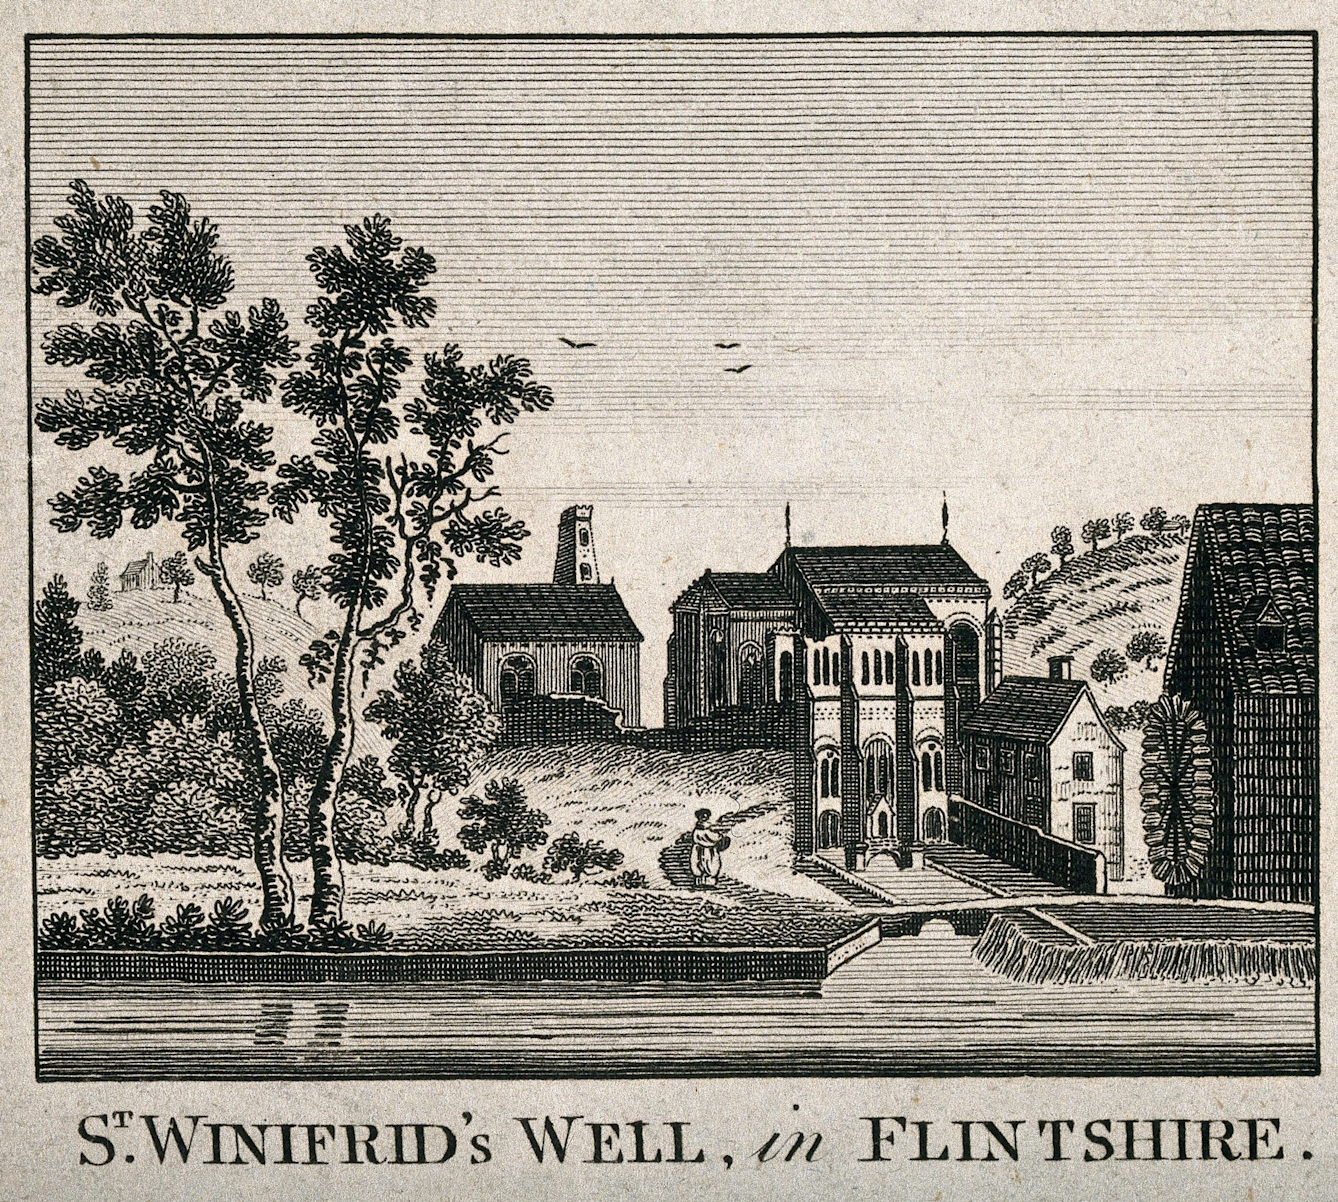 Black ink line engraving of St. Winifred's Well, in Flintshire, showing the building, water wheel and well. 